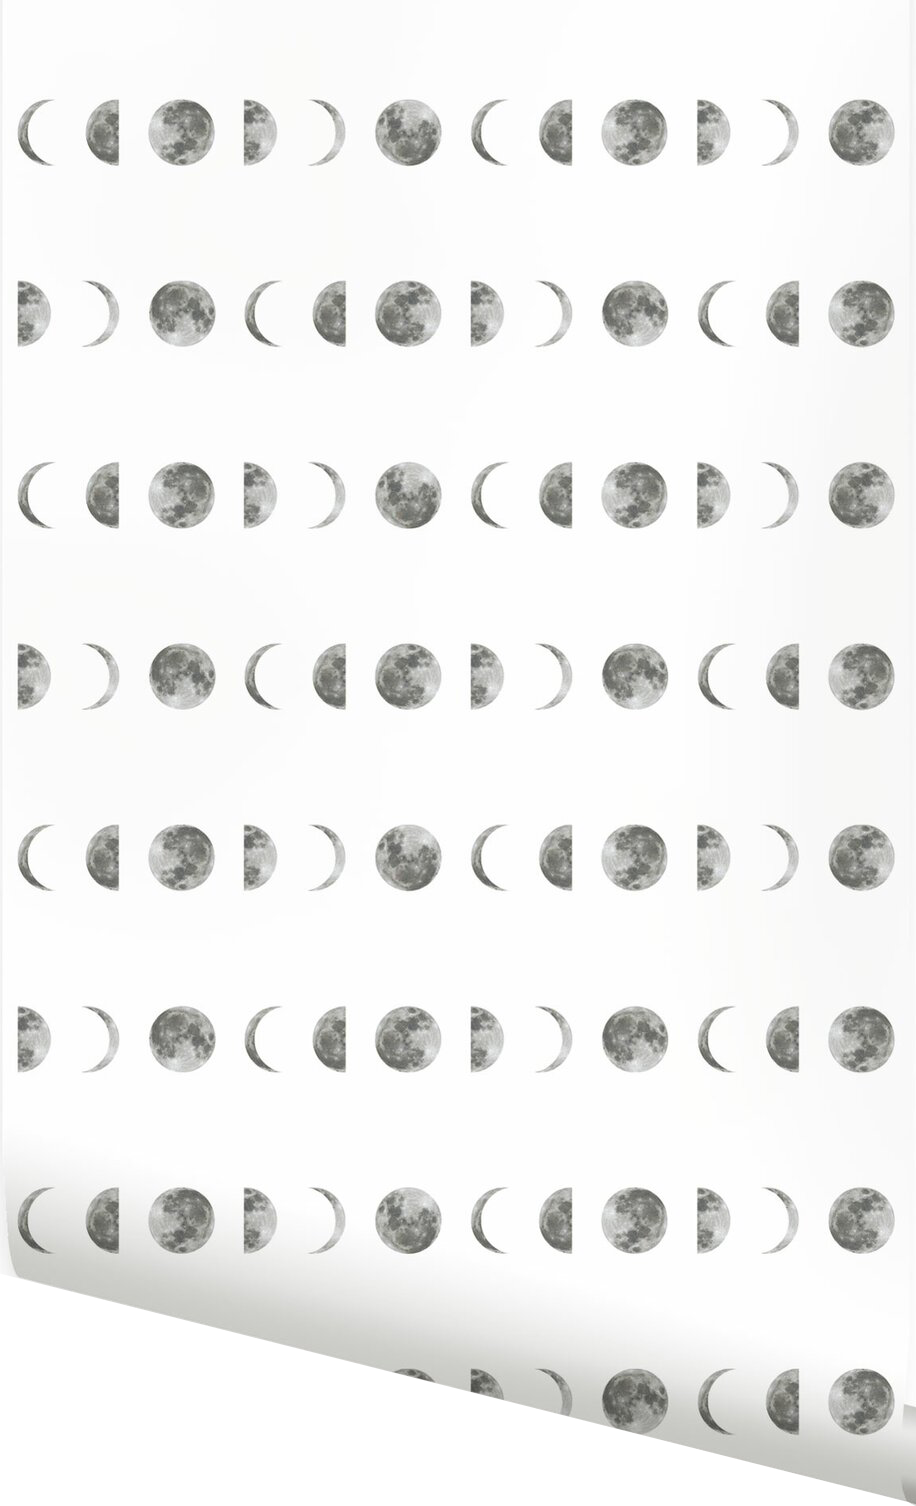 Fieldston+Phases+of+the+Moon+Paintable+Peel+and+Stick+Wallpaper+Roll.png